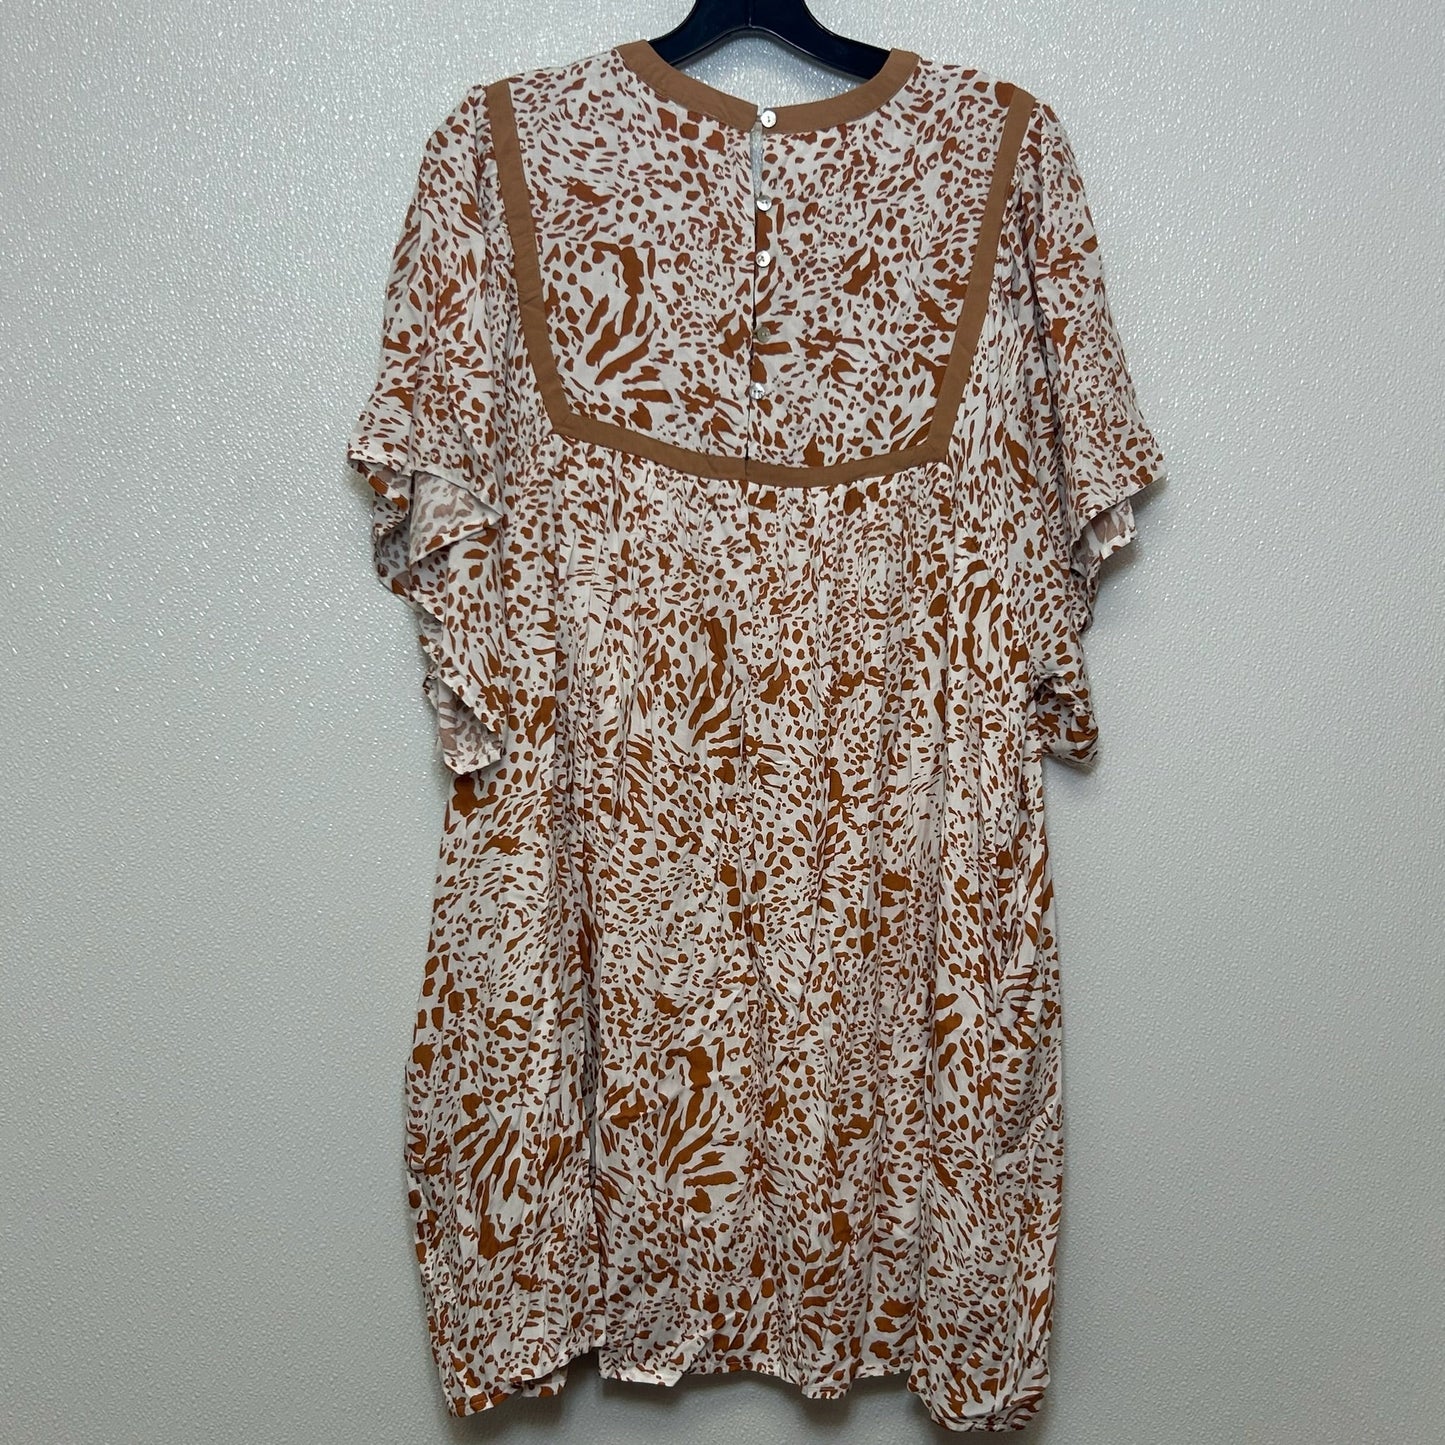 Multi-colored Dress Casual Short 143 Story, Size L